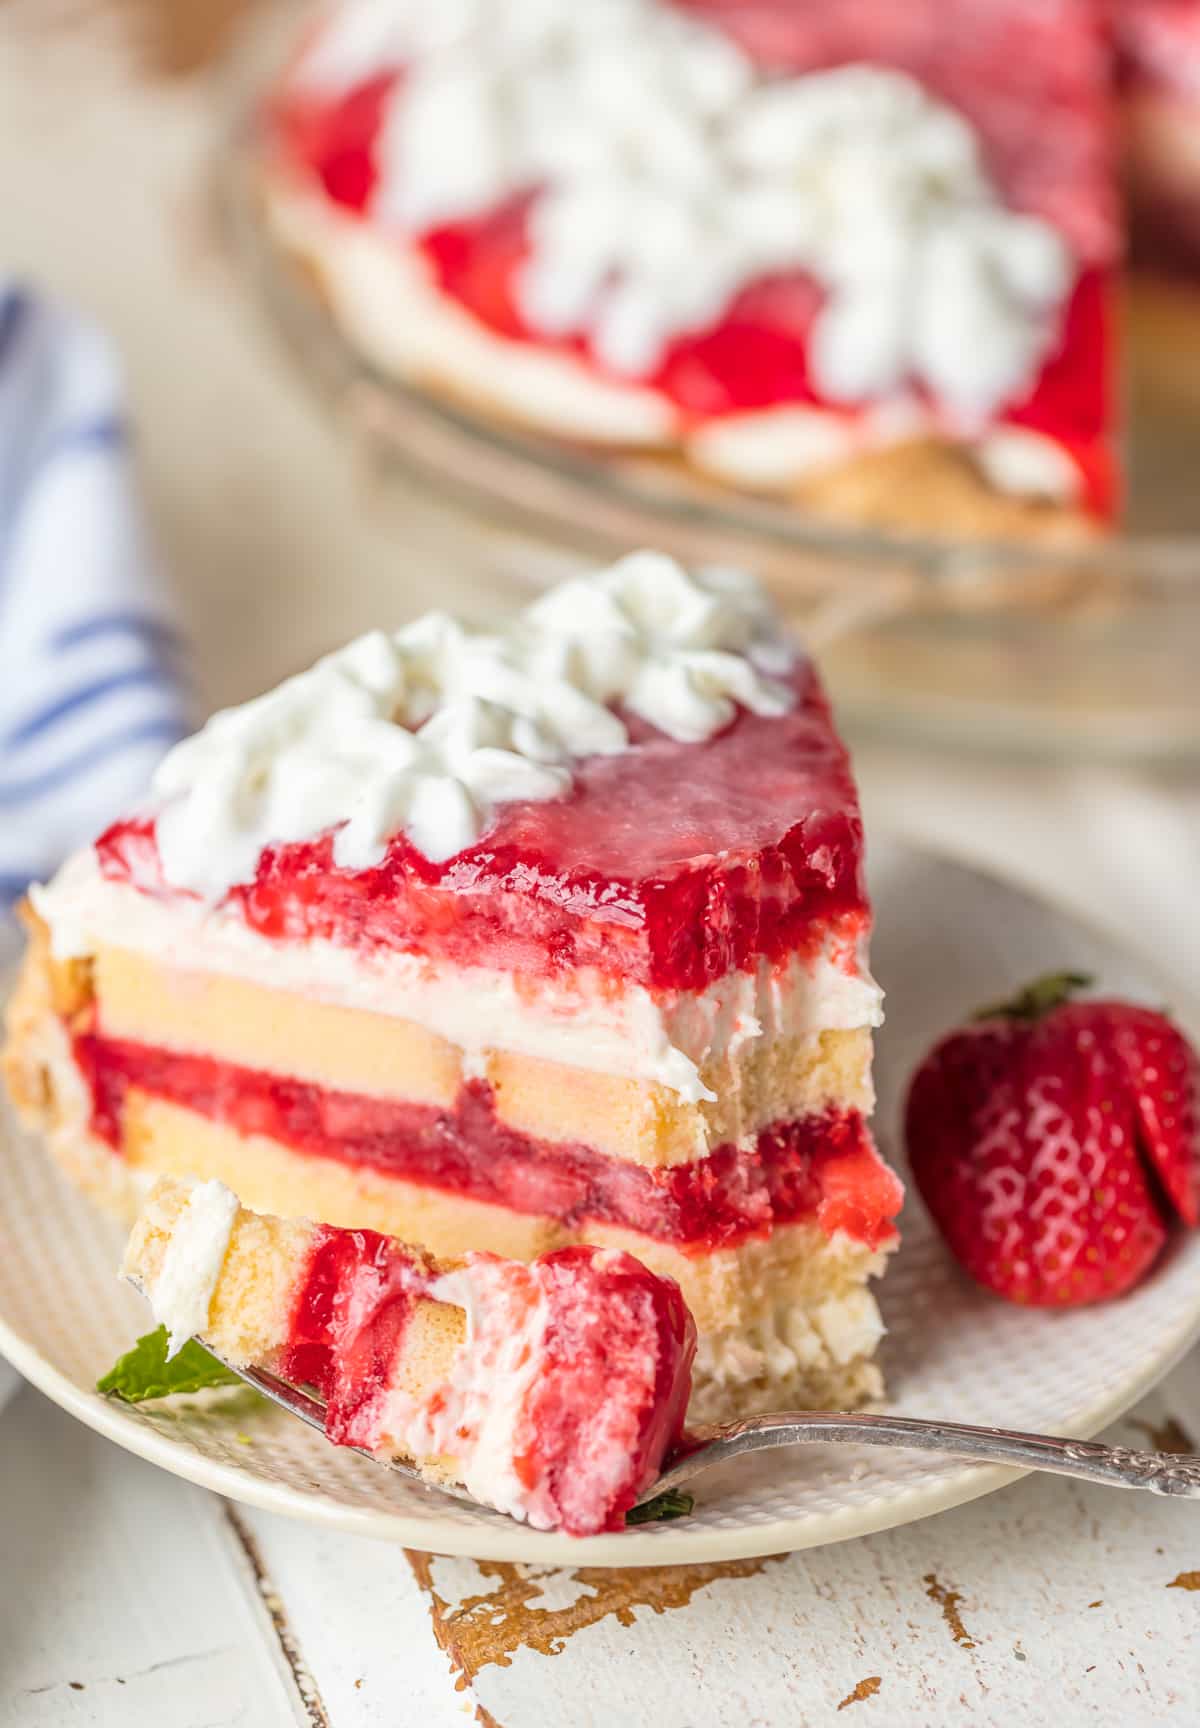 A slice of strawberry shortcake pie with a bite taken out